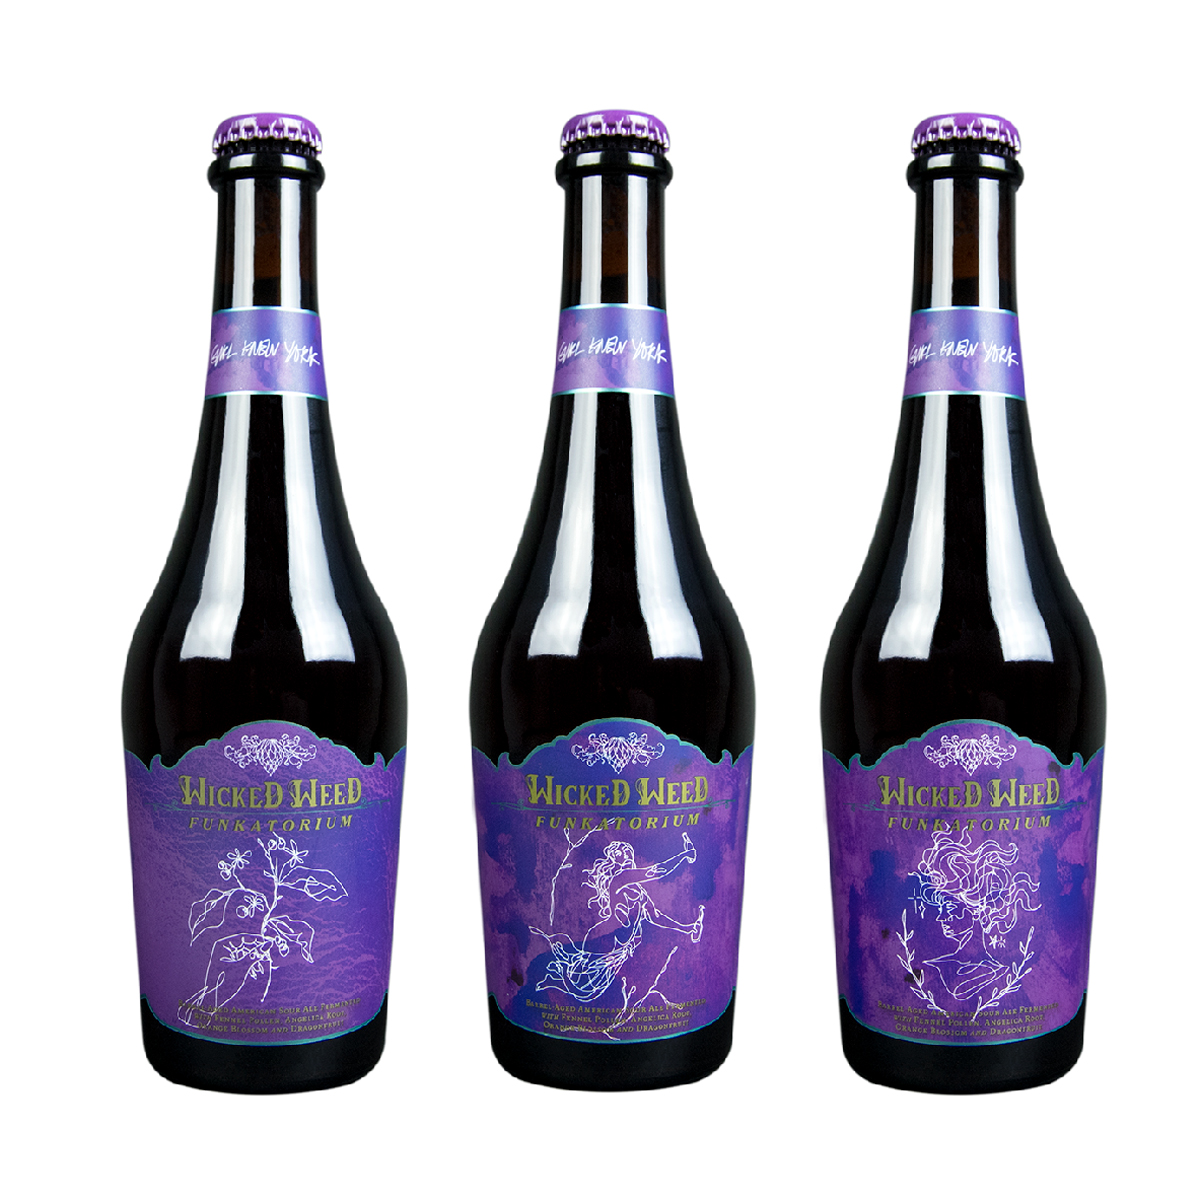 wicked weed brewing omnipresence